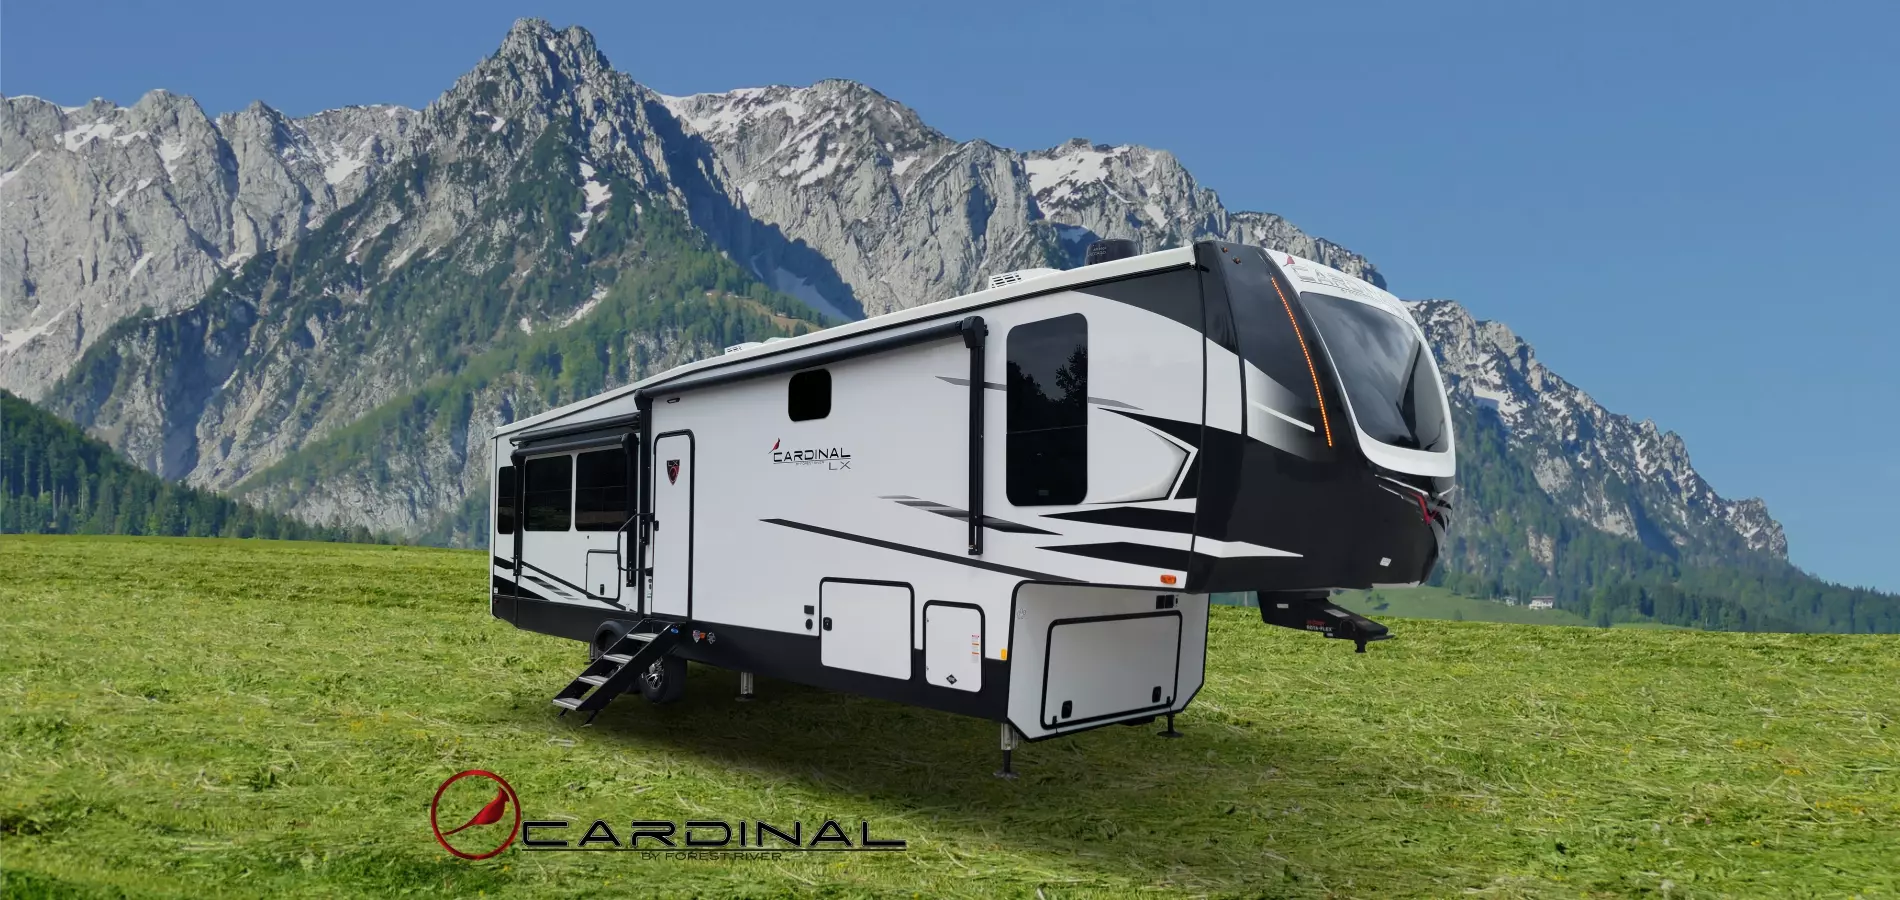 Cardinal Luxury Forest River Rv Manufacturer Of Travel